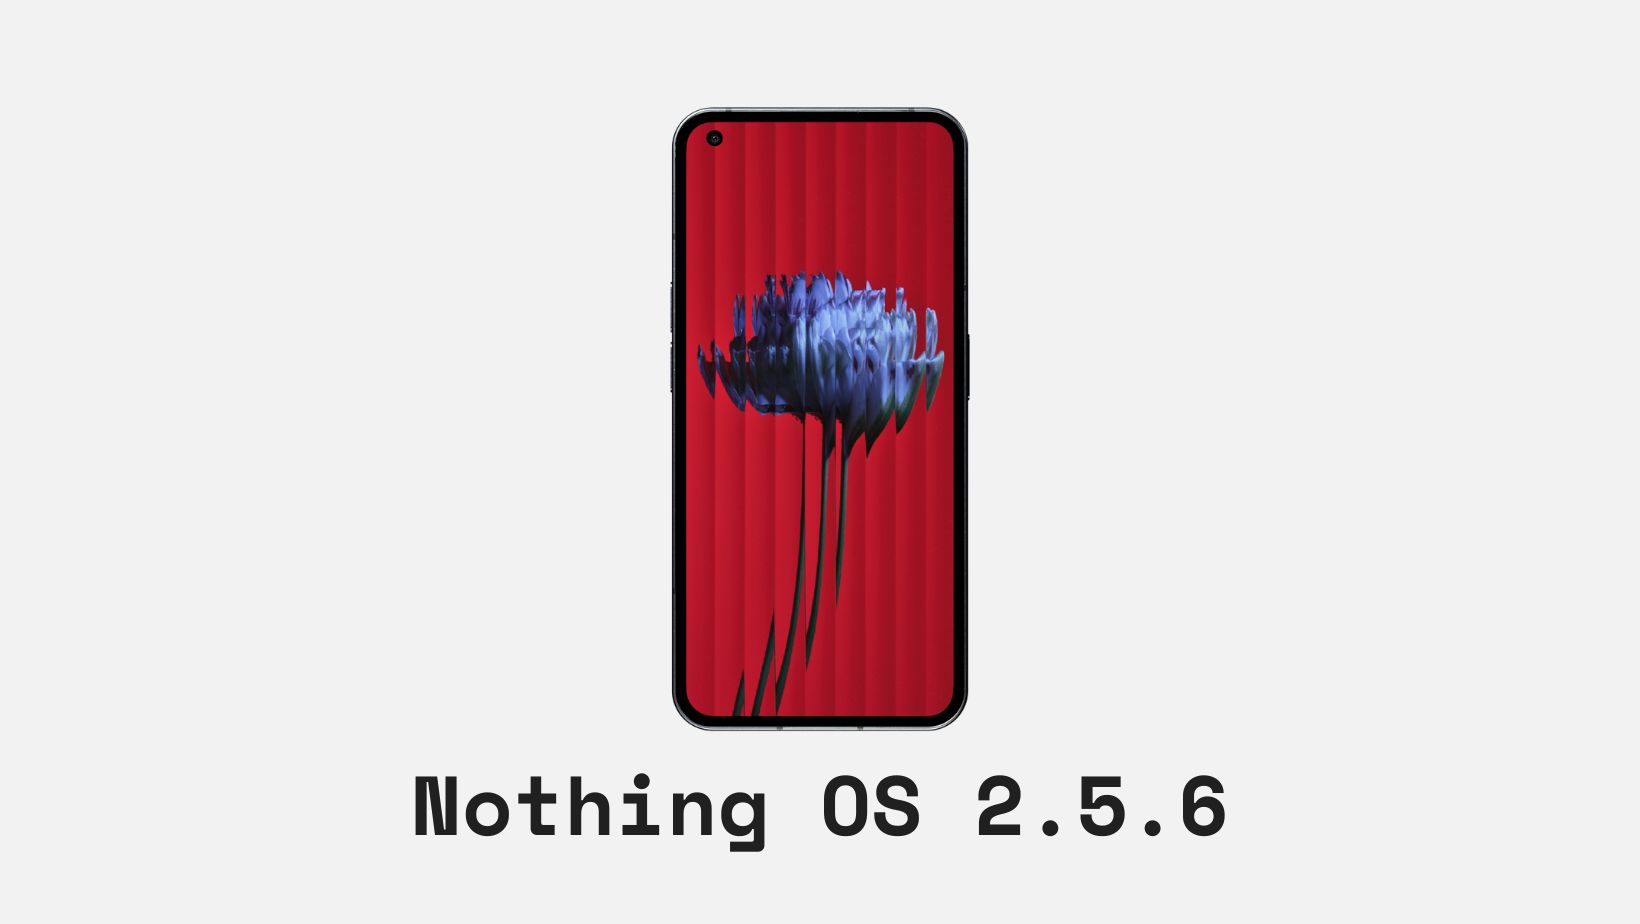 Download Nothing OS 2.5.6 for Phone 1 Hide Navigation Bar, Ultra HDR feature in Camera